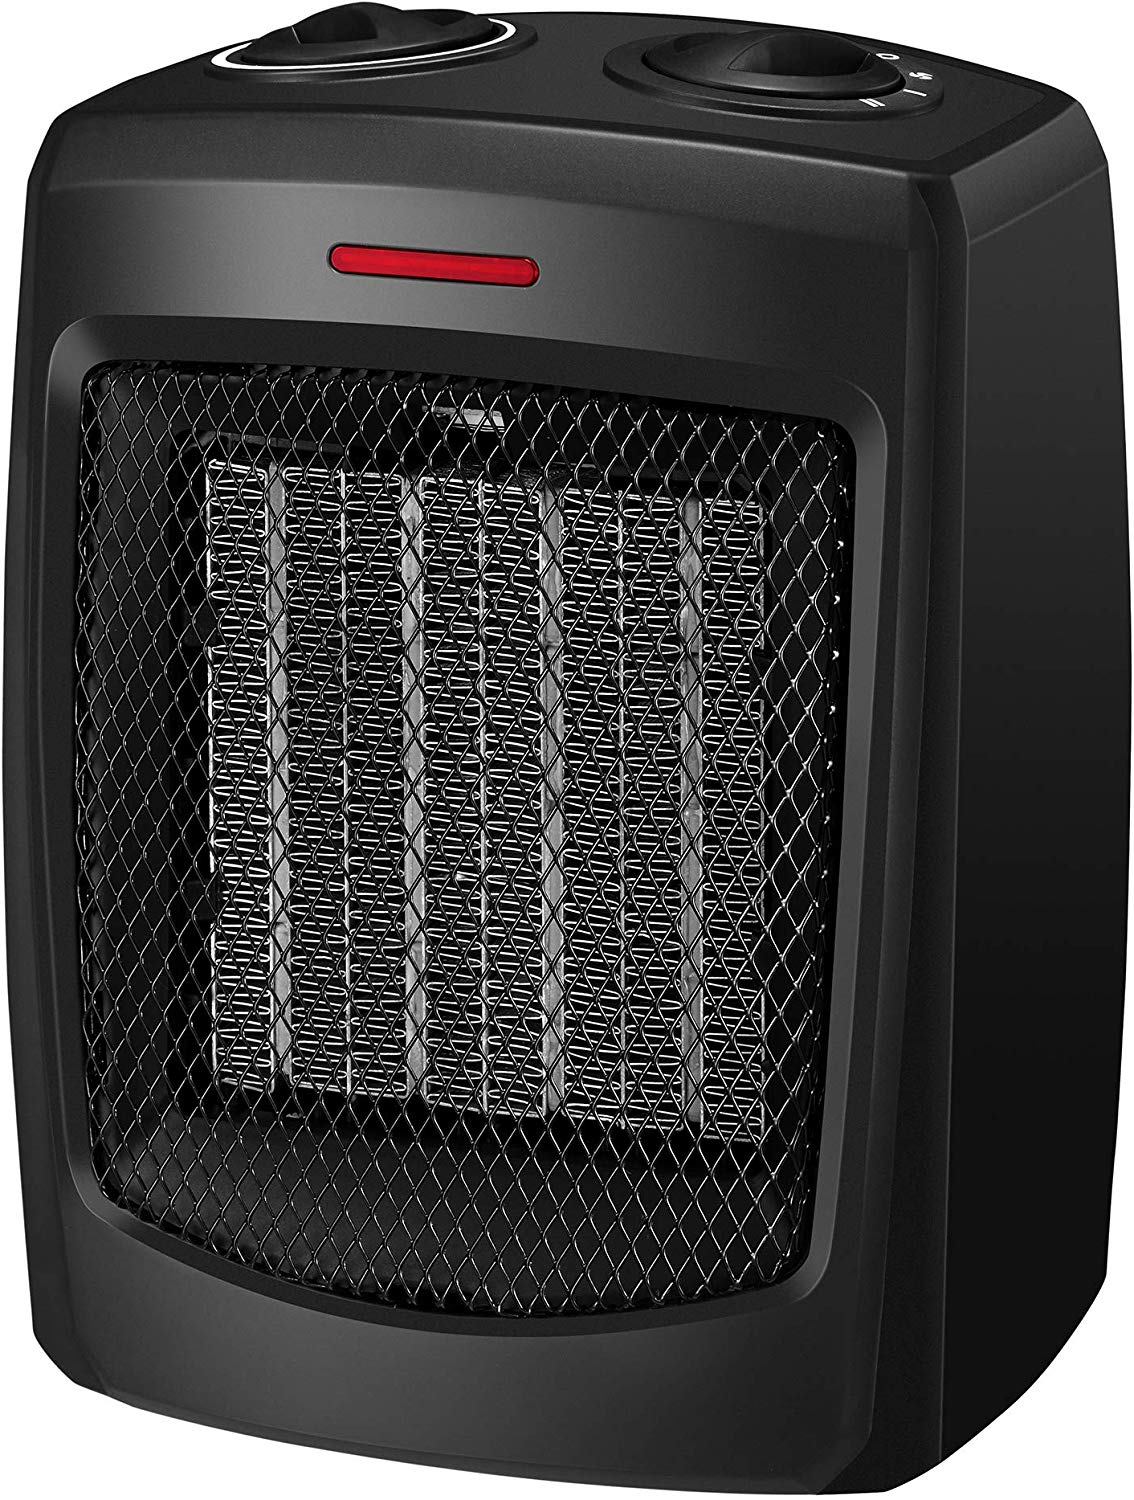 andily Space Heater Electric